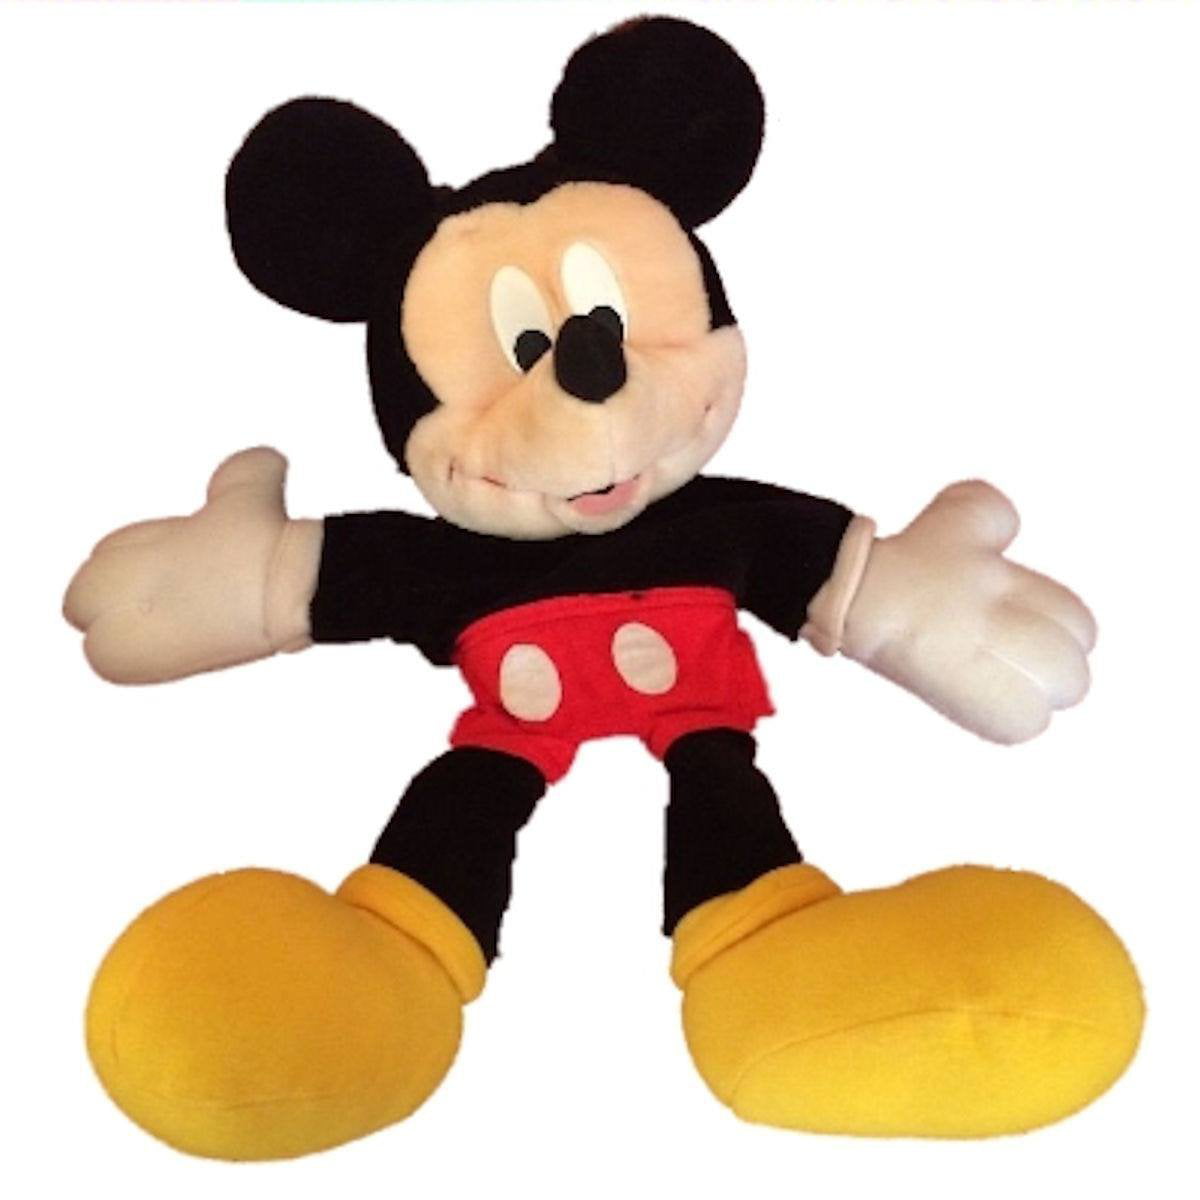 Brand New Disney Baby Mickey Mouse Plush Hand Puppet Full Size 14" Soft Toy 